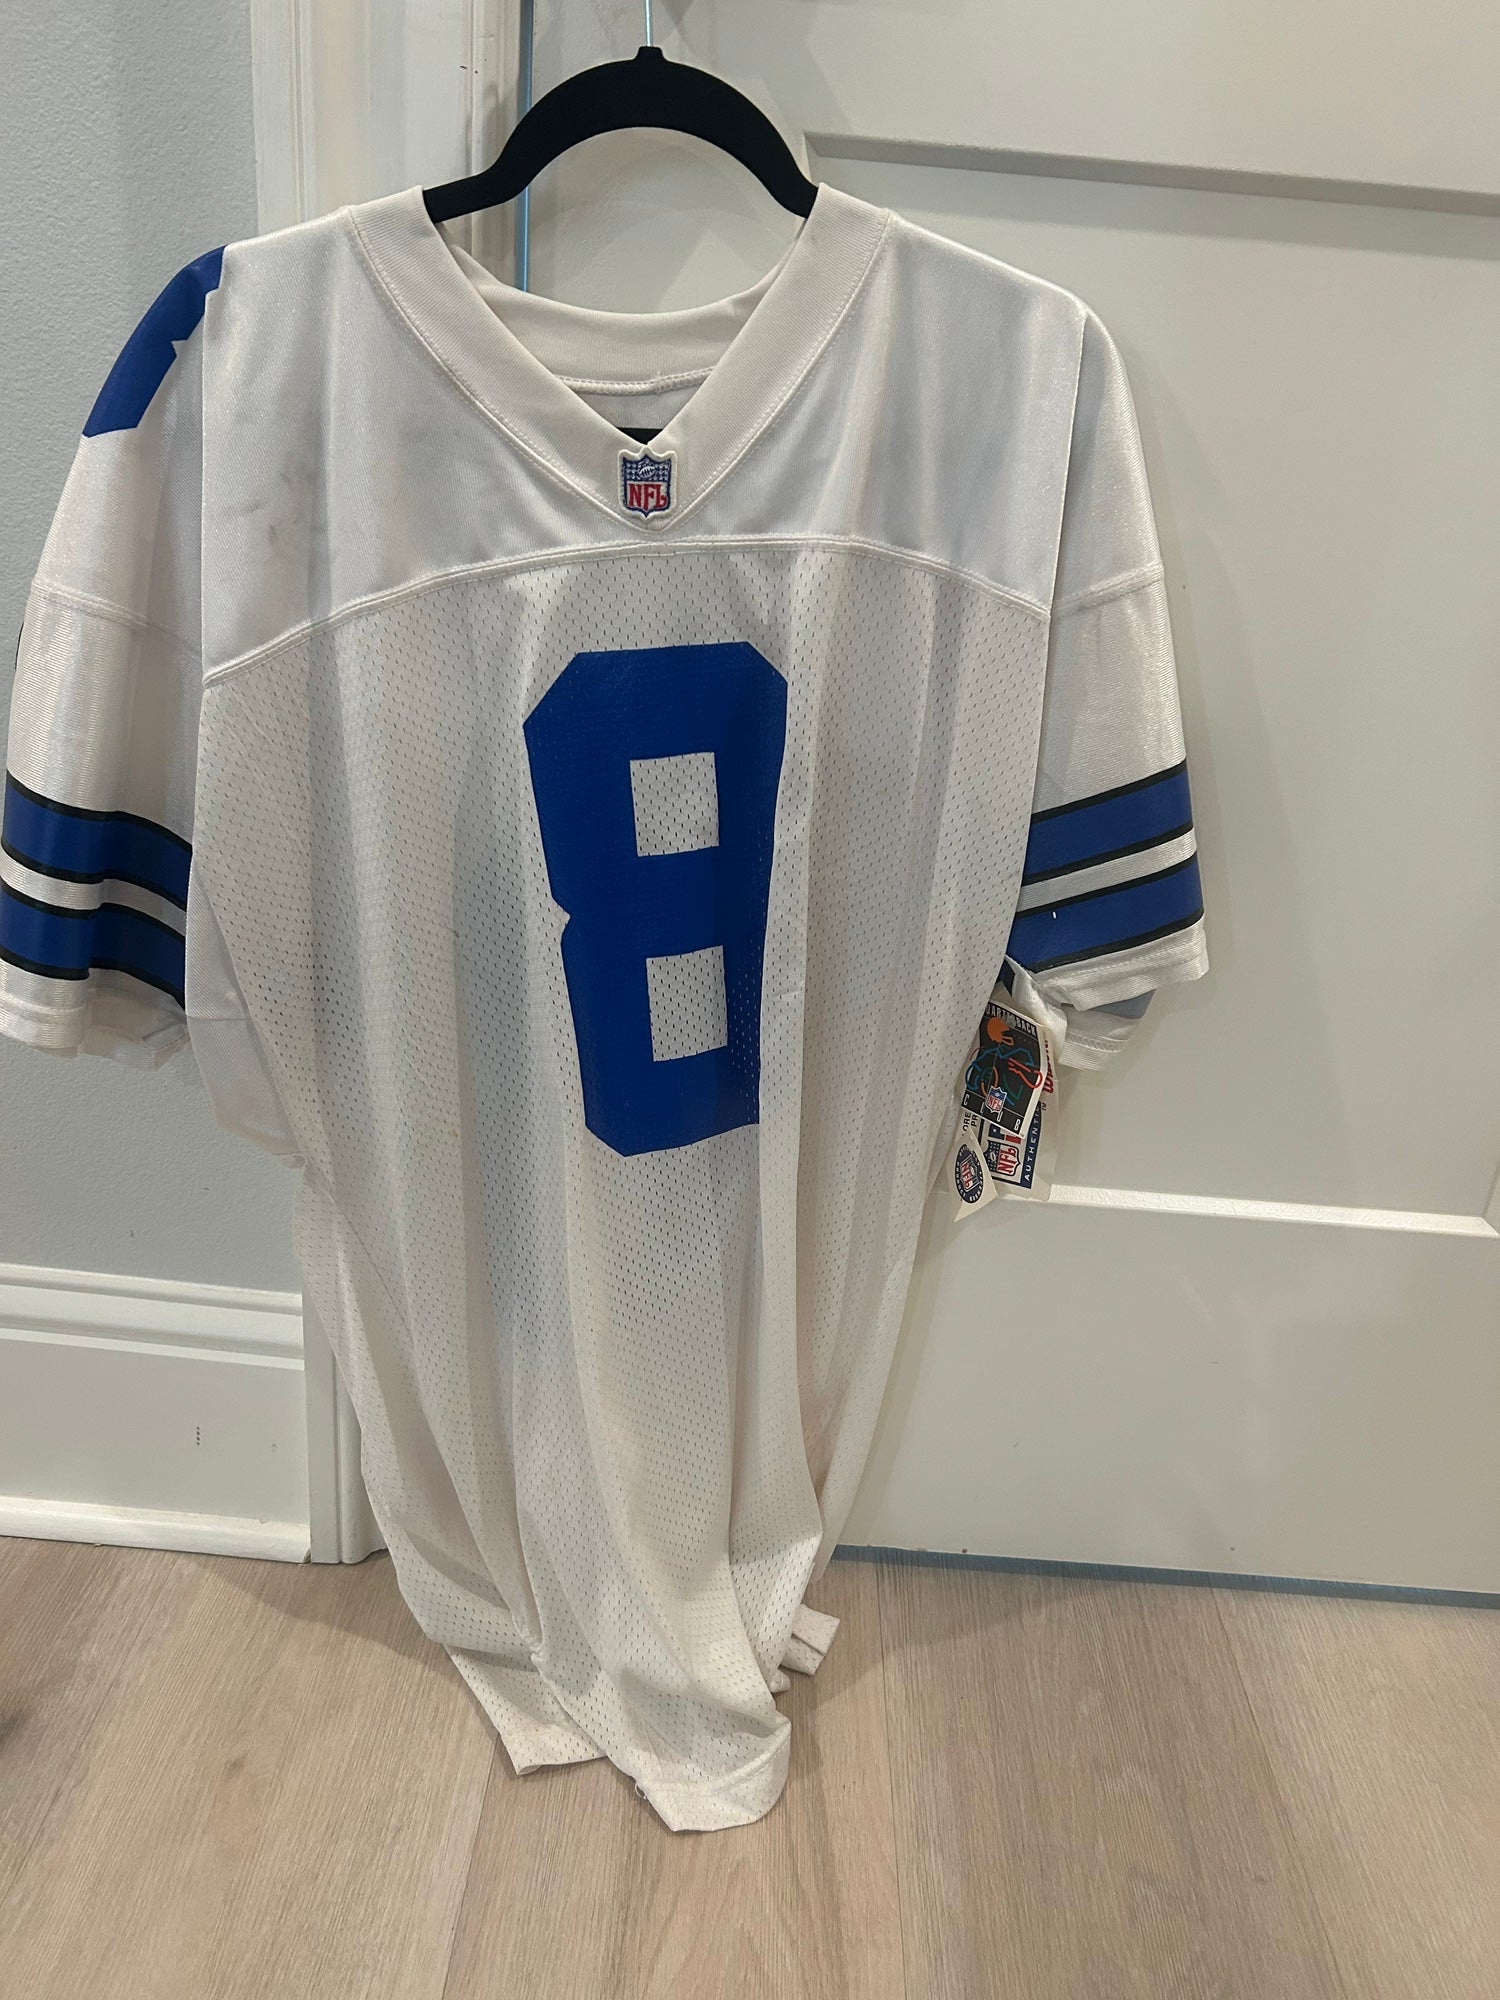 signed aikman jersey